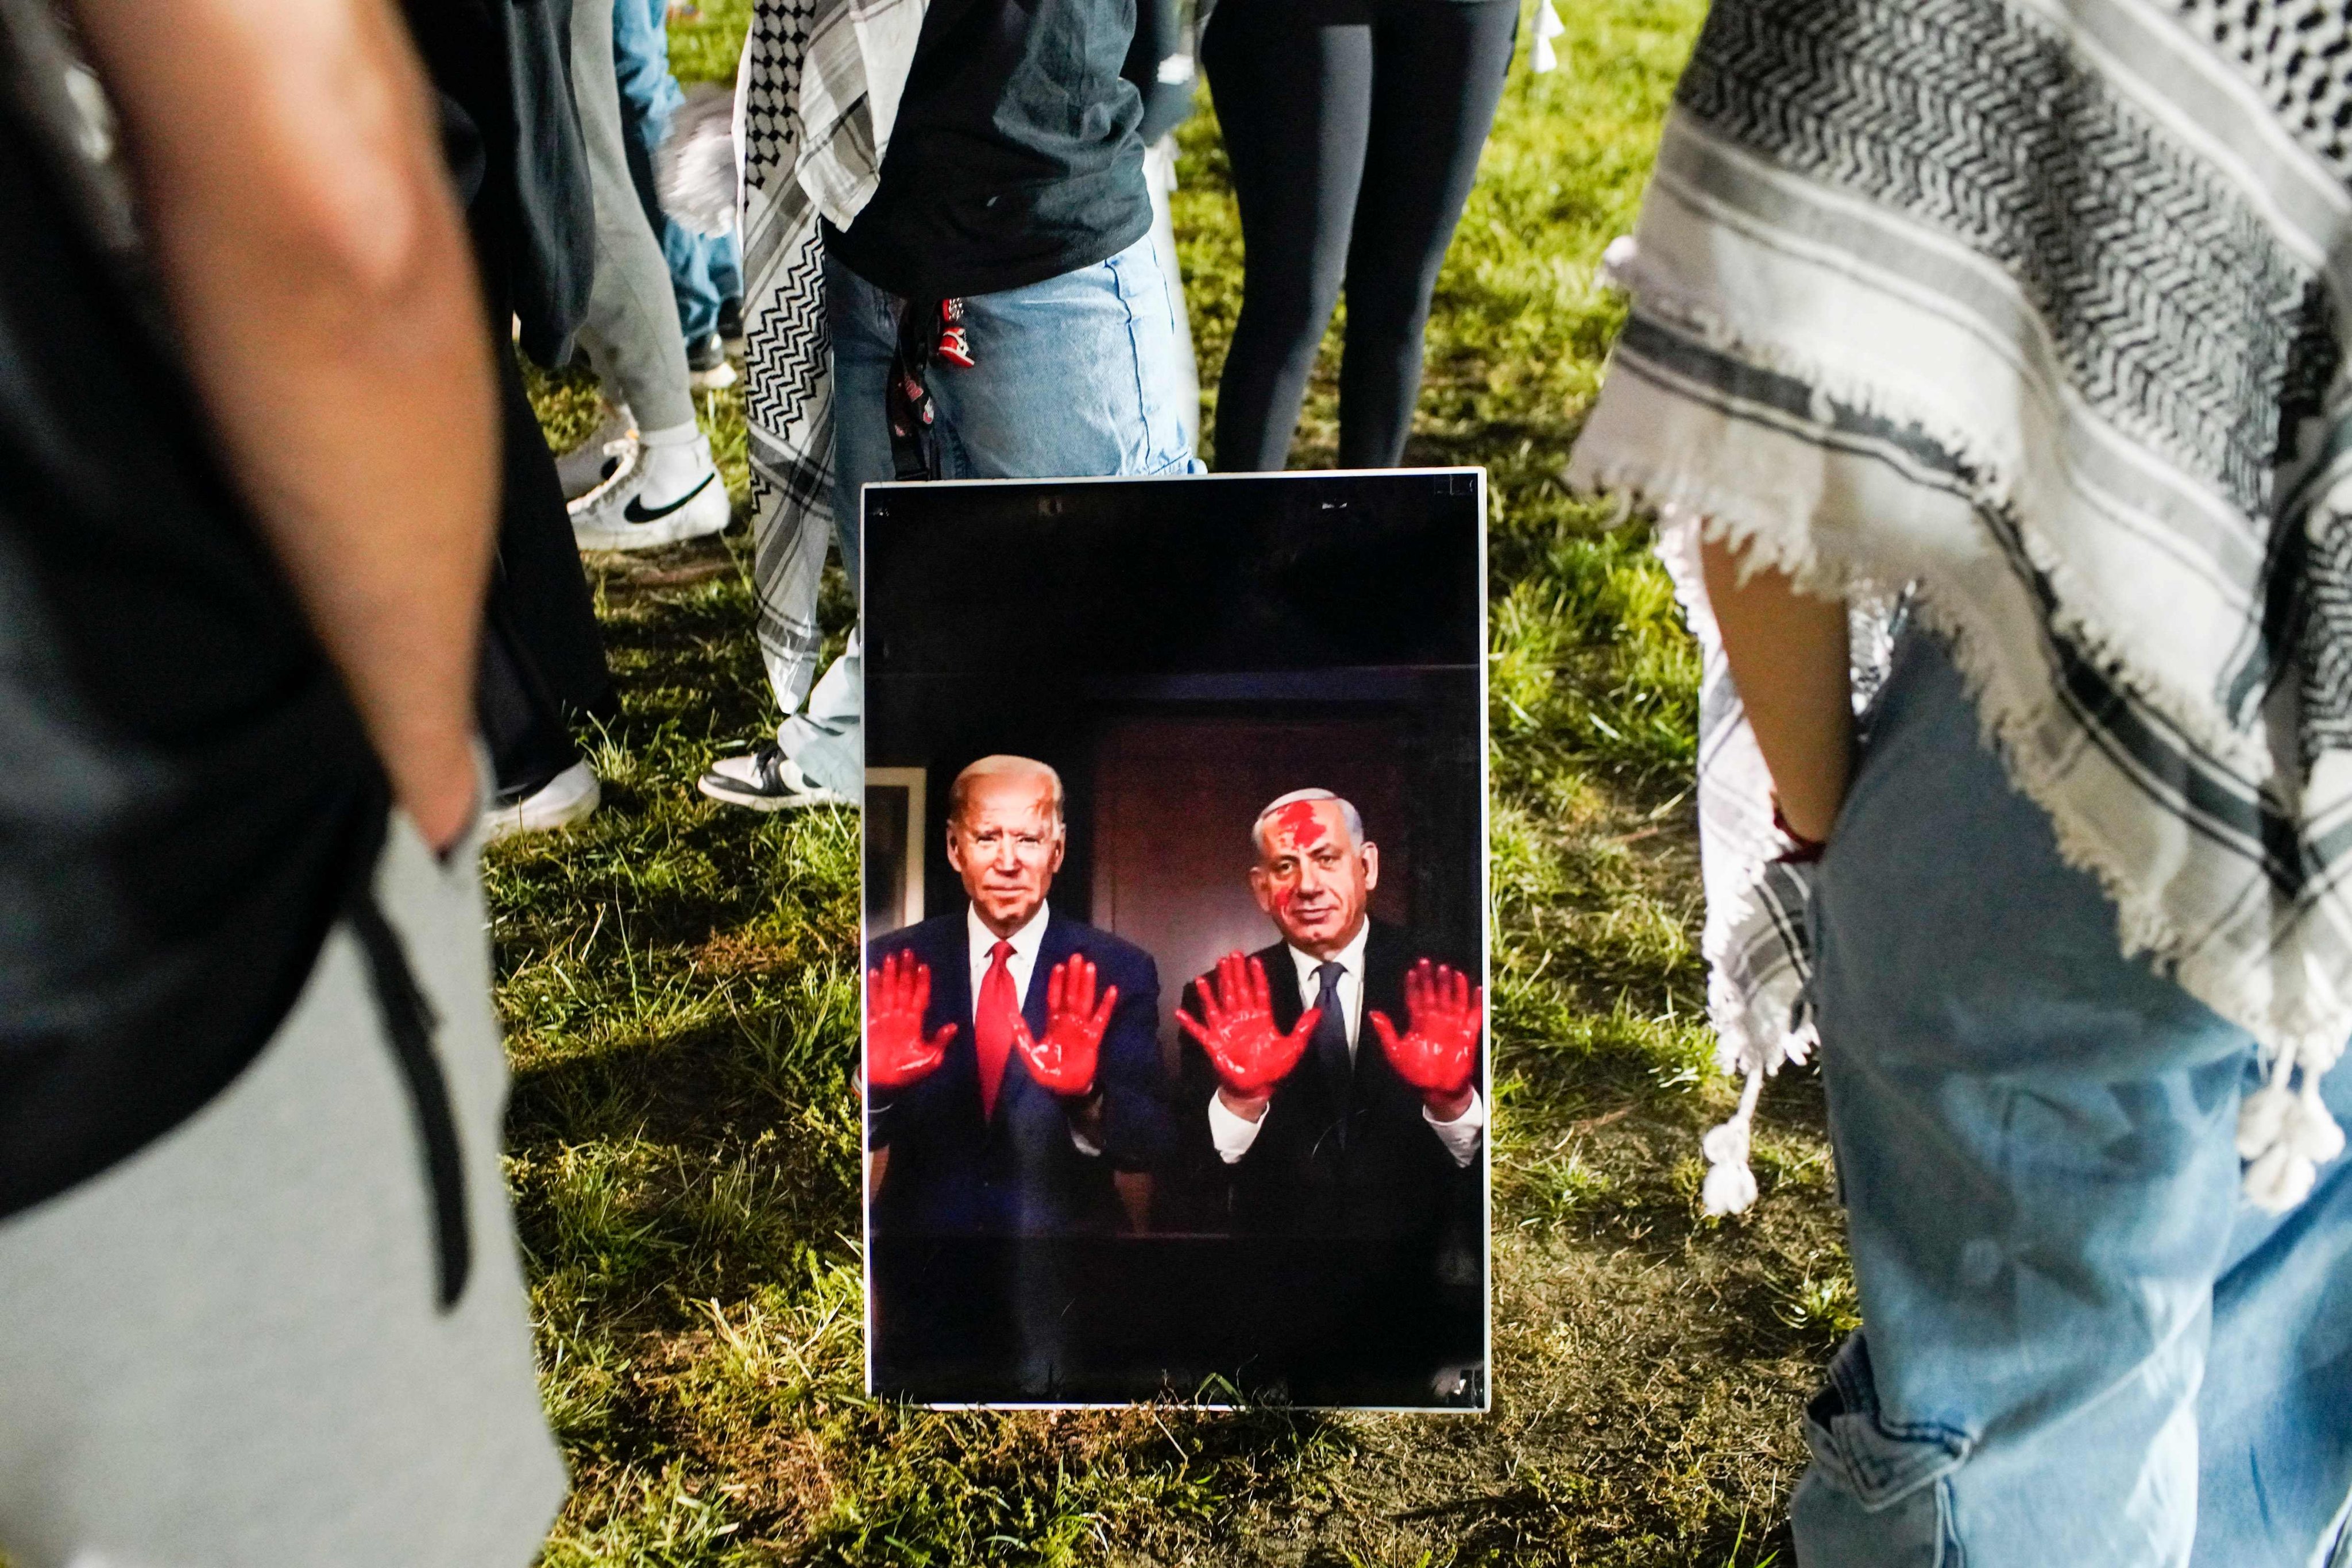 Pro-Palestinian protesters at Ohio State University in the US display a sign depicting President Joe Biden and Israeli Prime Minister Benjamin Netanyahu with blood on their hands on Wednesday. Photo: Getty Images via AFP